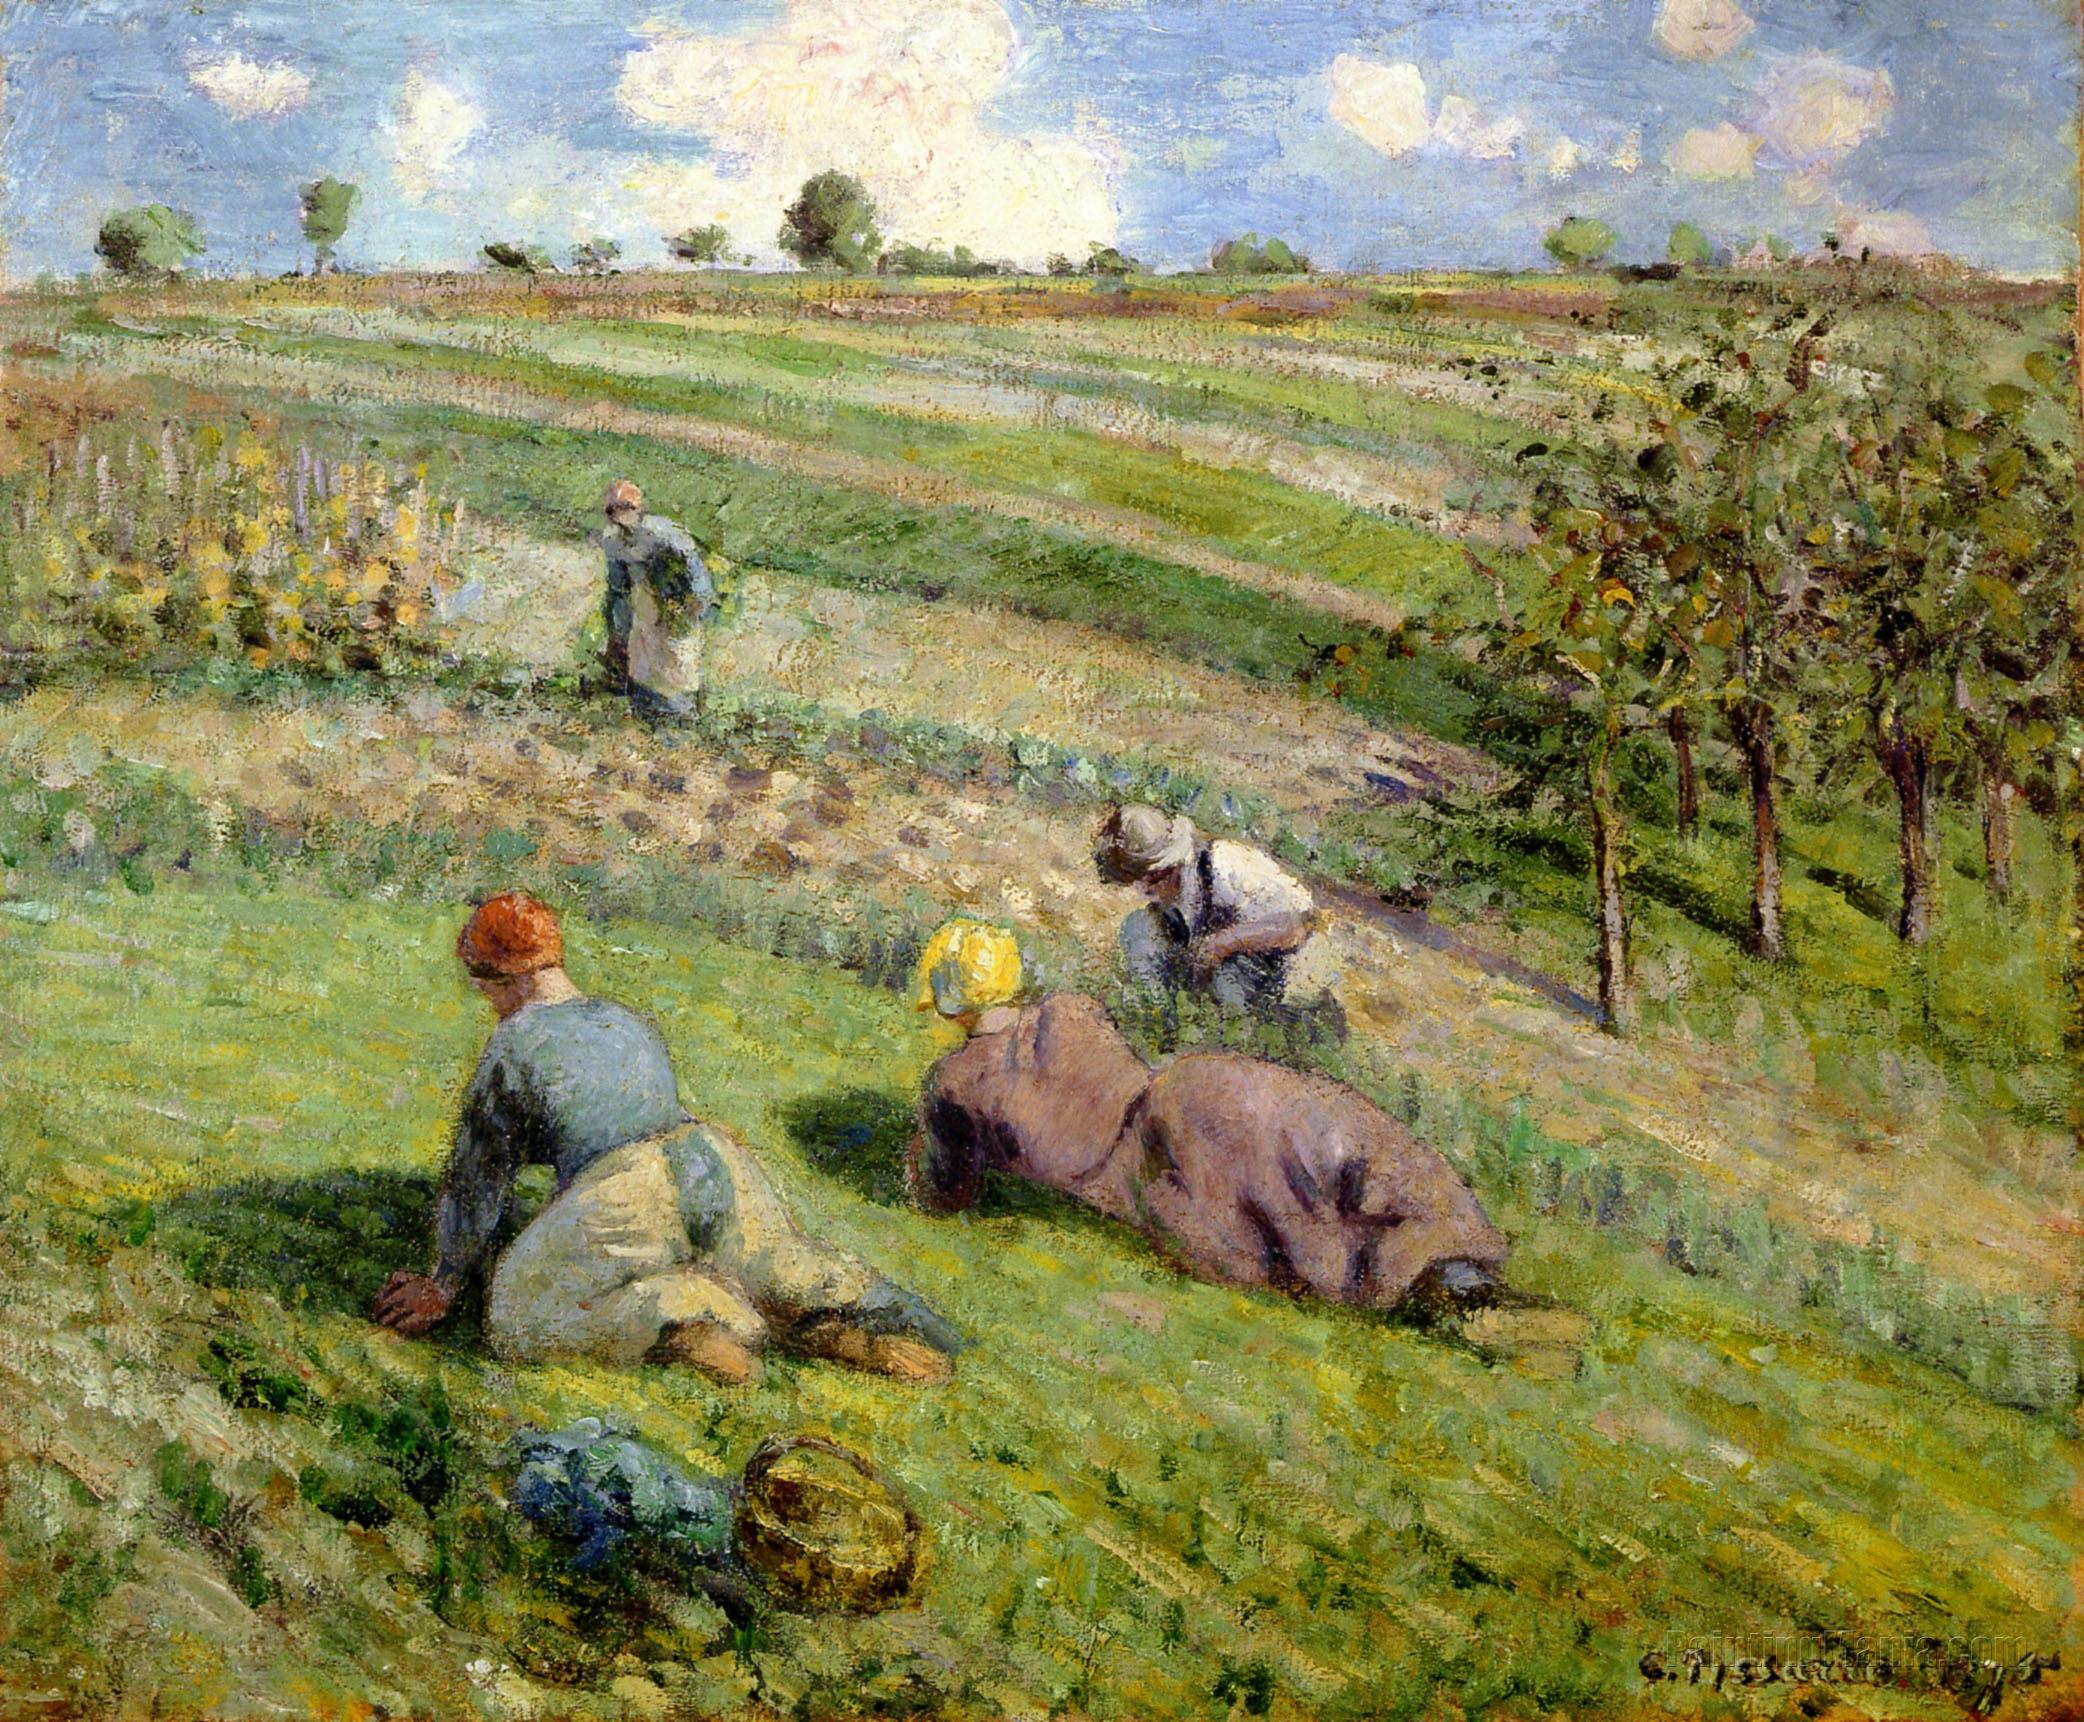 Cultivators in the Fields, Pontoise (The Hills of Auvers)